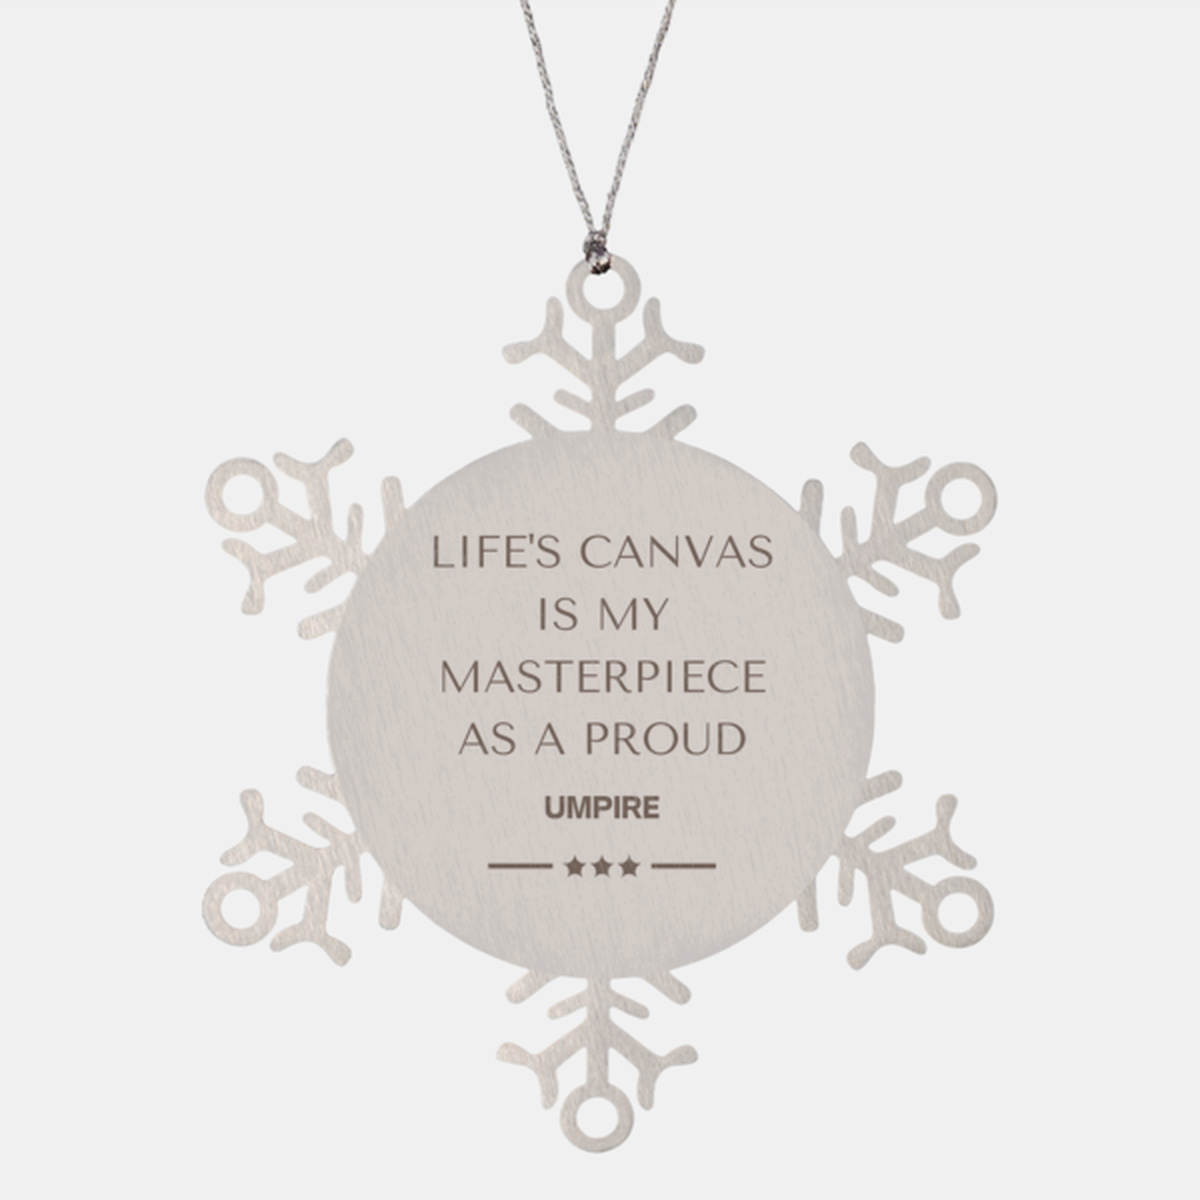 Proud Umpire Gifts, Life's canvas is my masterpiece, Epic Birthday Christmas Unique Snowflake Ornament For Umpire, Coworkers, Men, Women, Friends